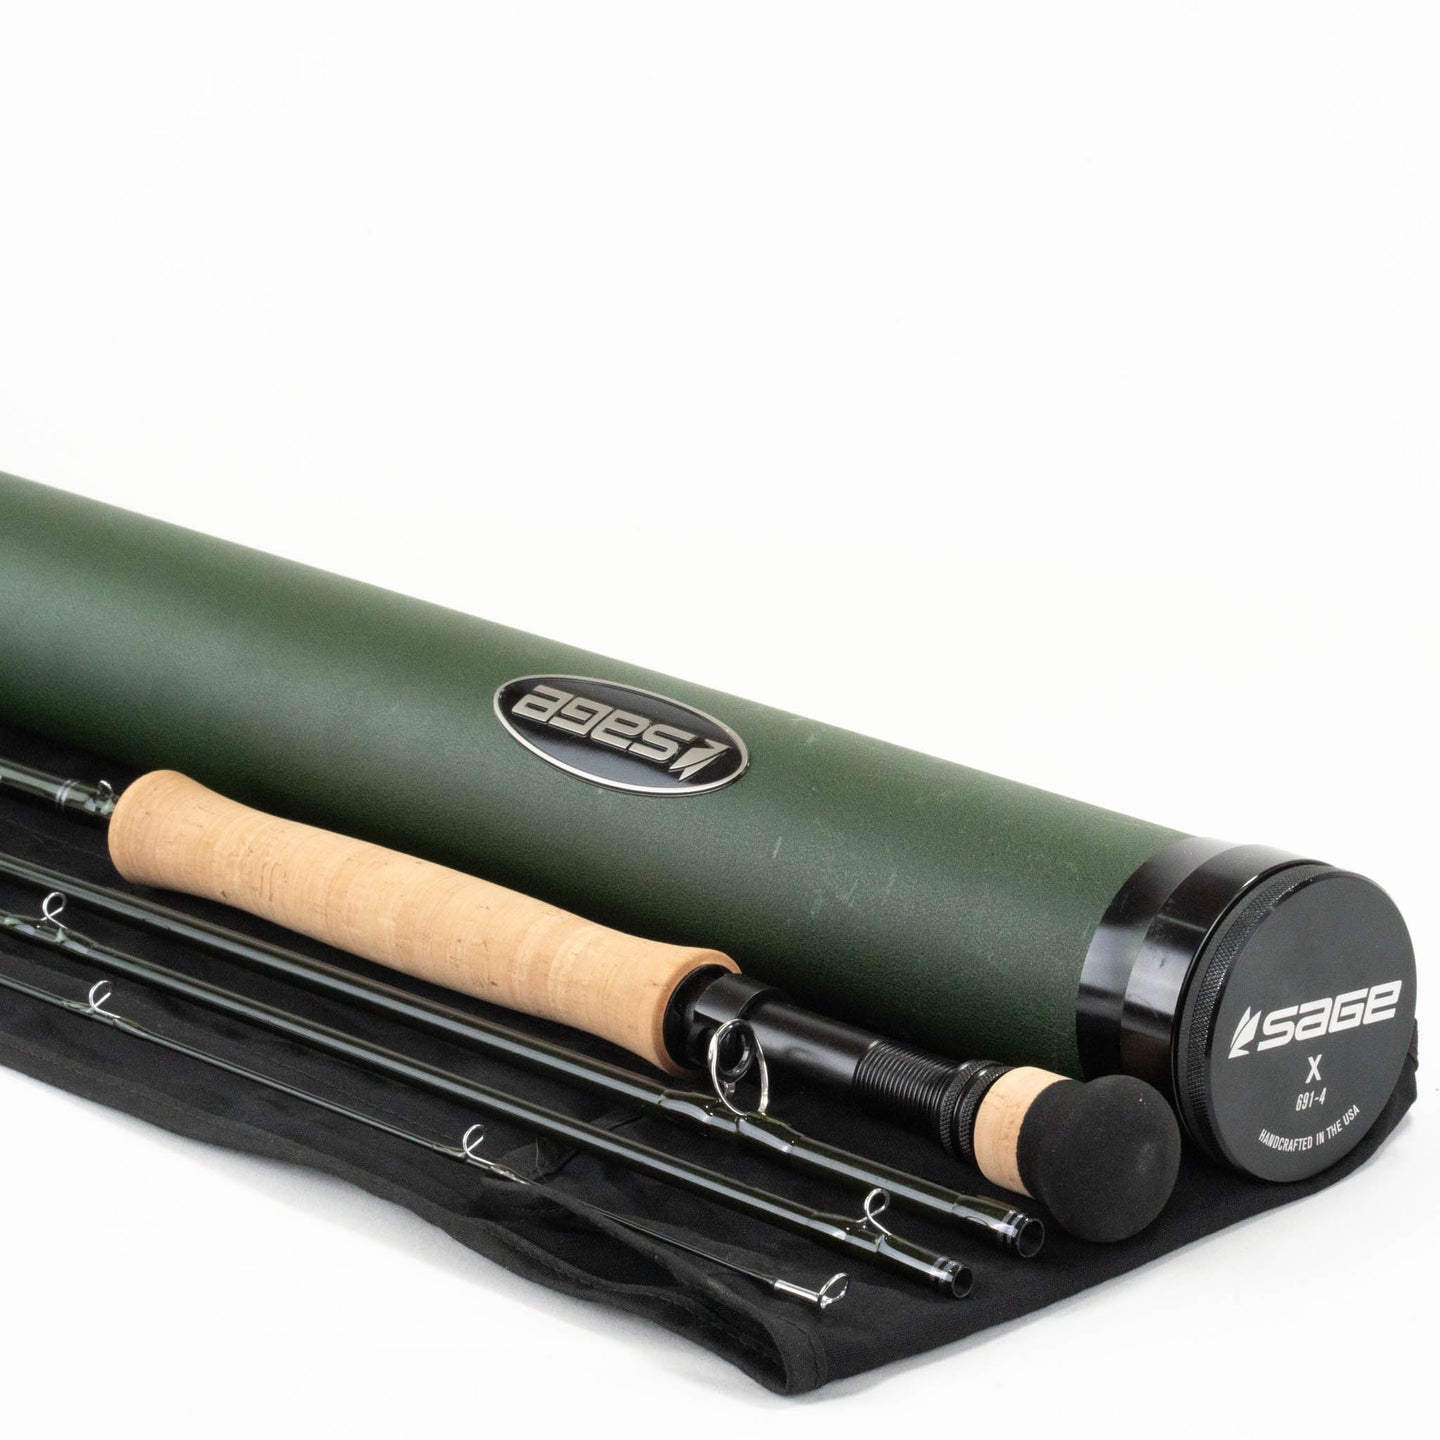 Sage X 690-4 Fly Rod - 6wt 9ft 0in 4pc